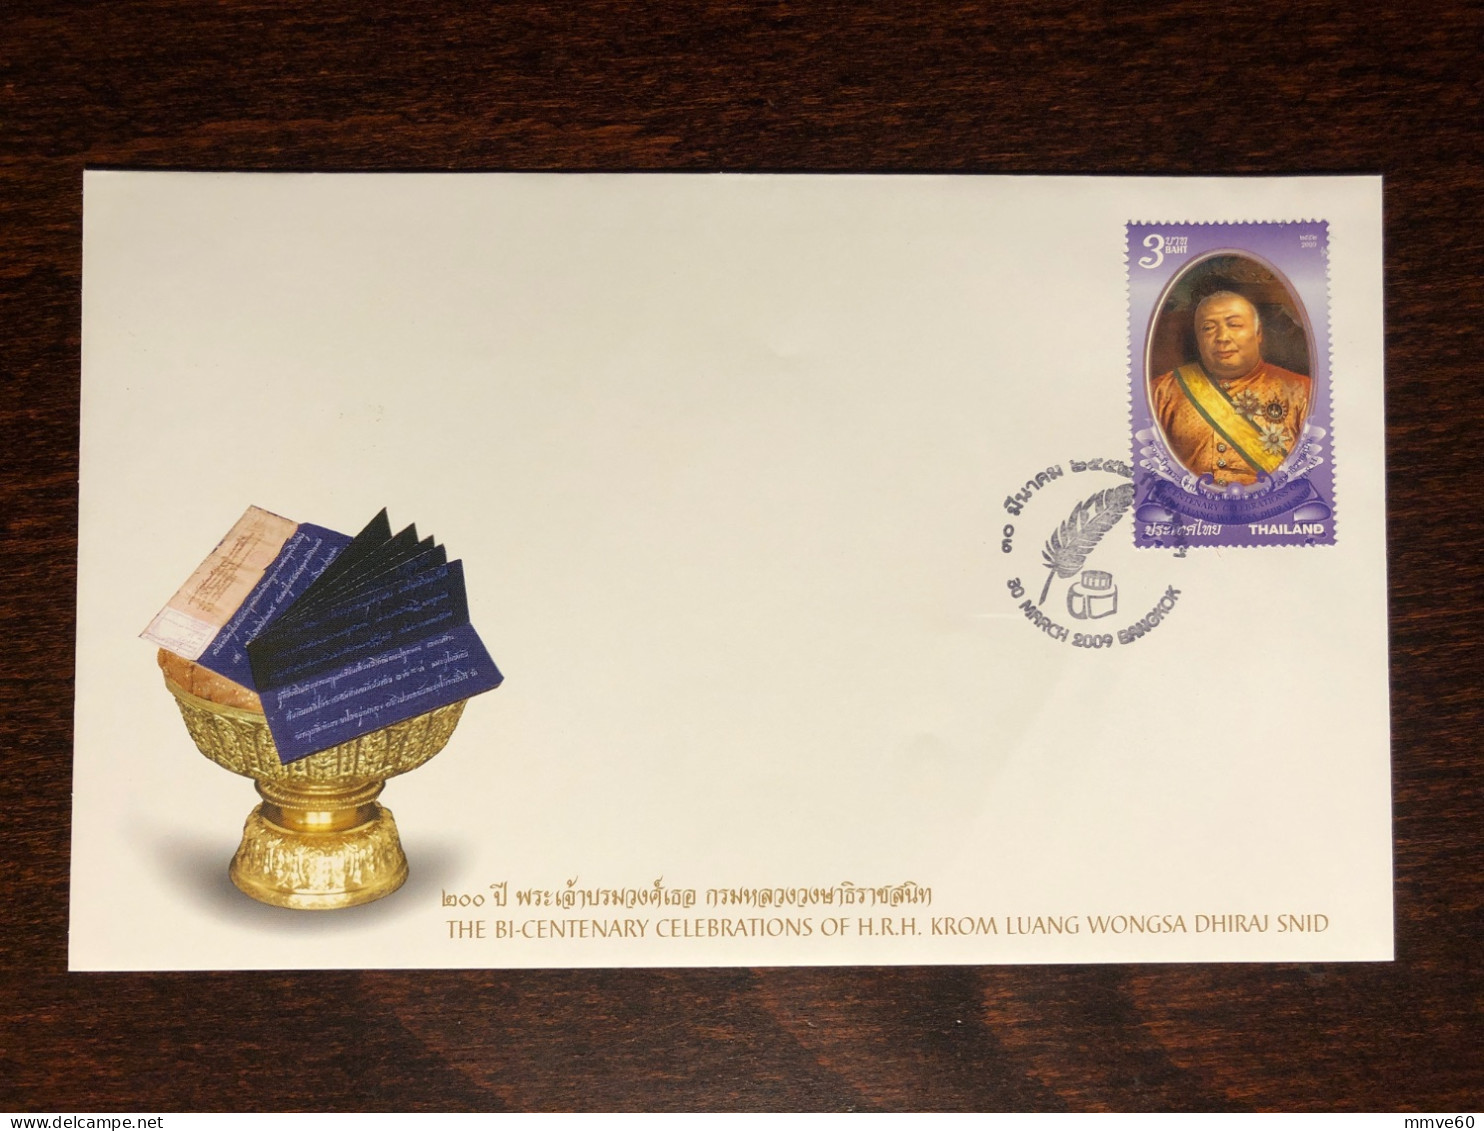 THAILAND FDC COVER 2009 YEAR WRITER POET  STAMPS - Thaïlande